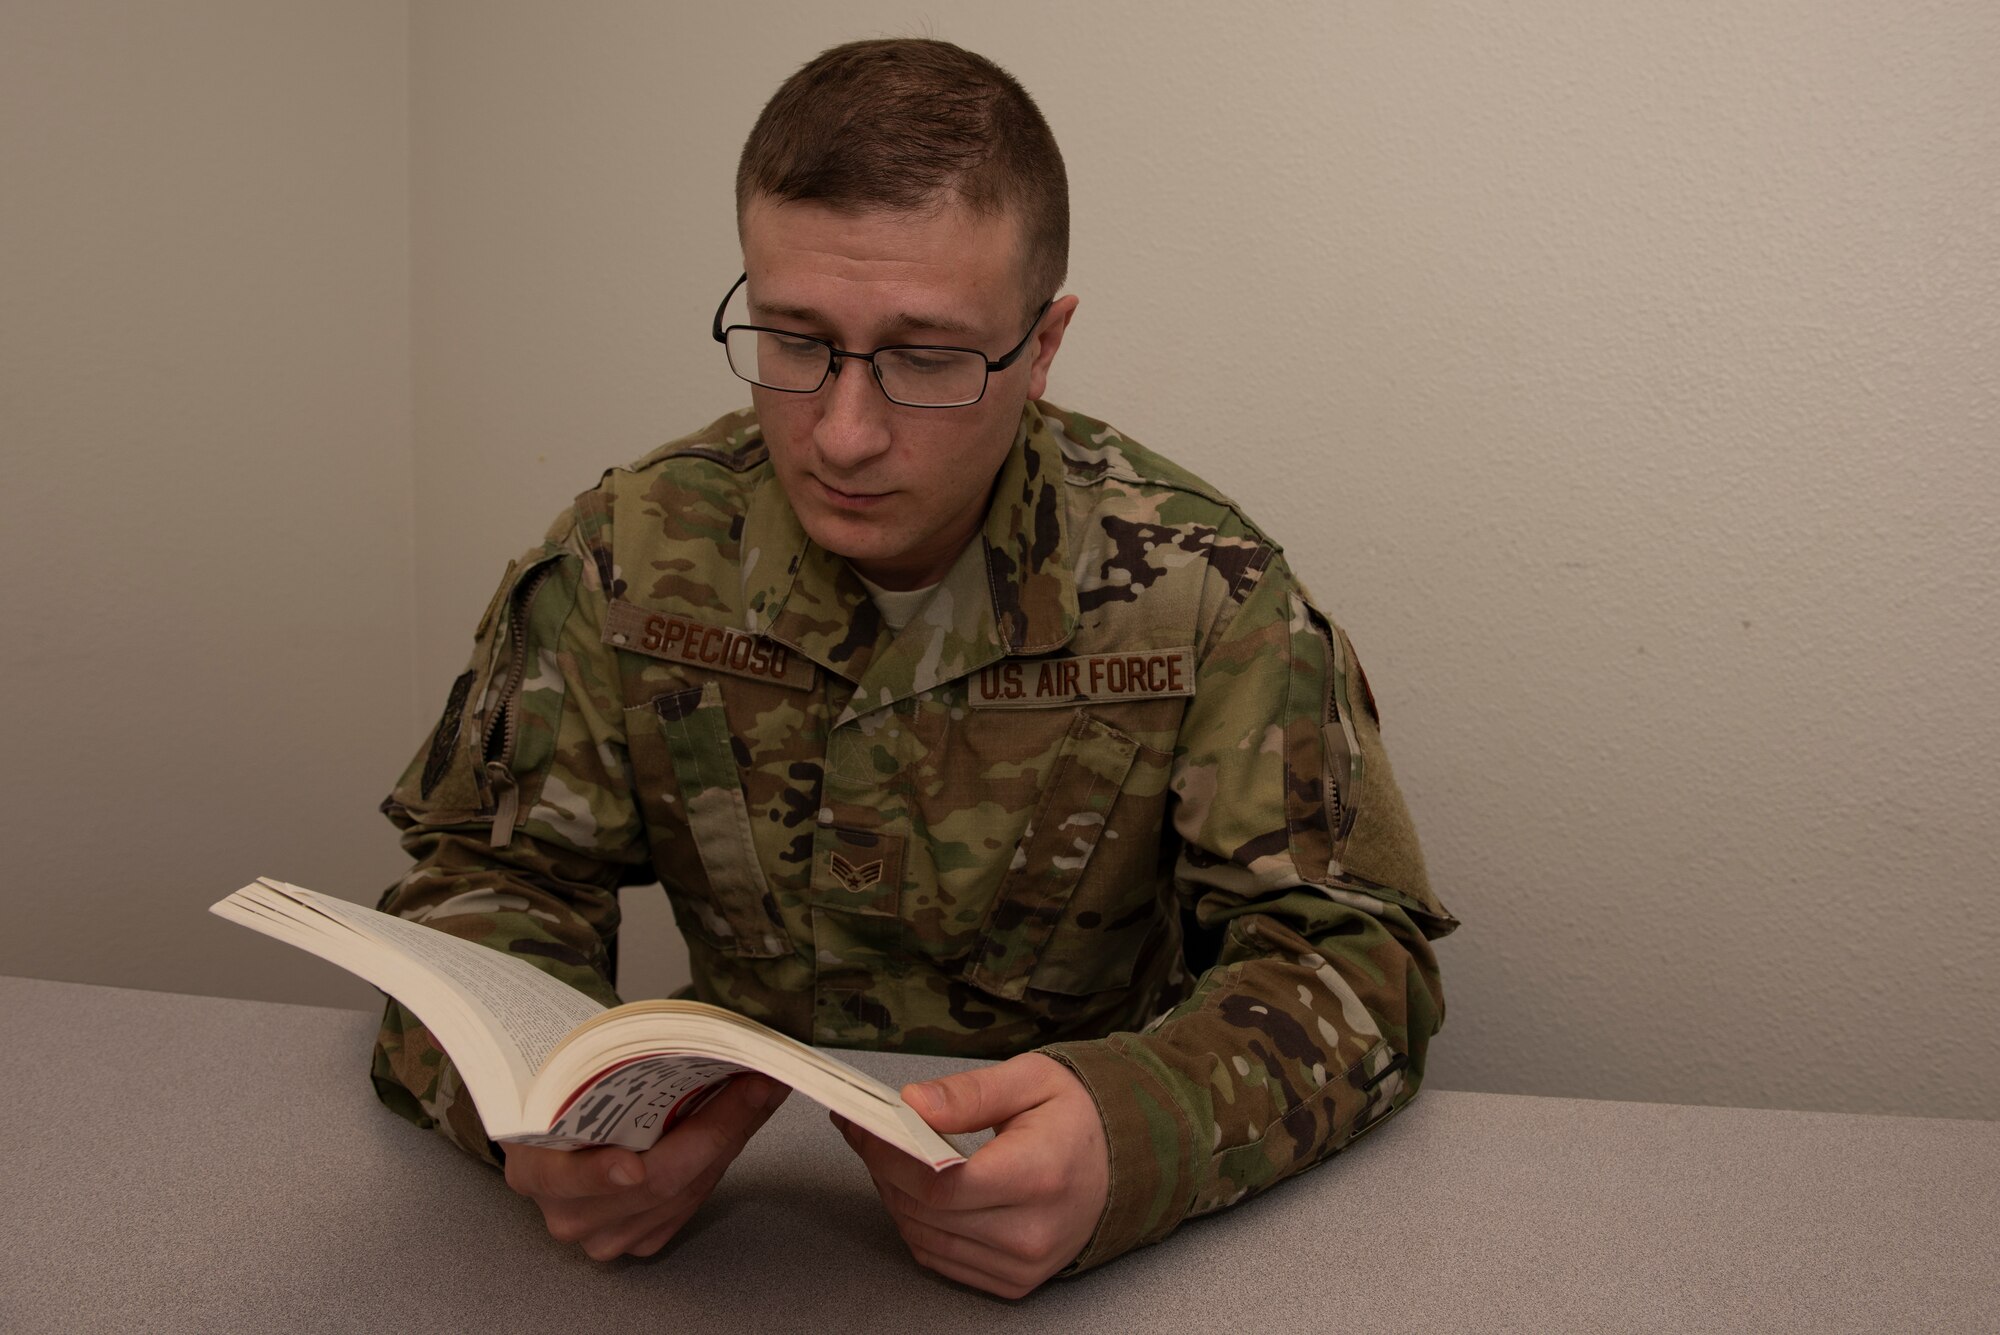 U.S. Air Force Senior Airman Michael Specioso, 60th Security Forces Squadron acting NCO in charge of vehicle operations, reads “Grit: The Power of Passion and Perseverance” by Angela Duckworth March 7, 2019, at Travis Air Force Base, California. The book was the first in the newly implemented professional literature program at Travis where participants read one book a month and provide feedback on what they learned during a monthly discussion group. (U.S. Air Force photo by Tech. Sgt. James Hodgman)